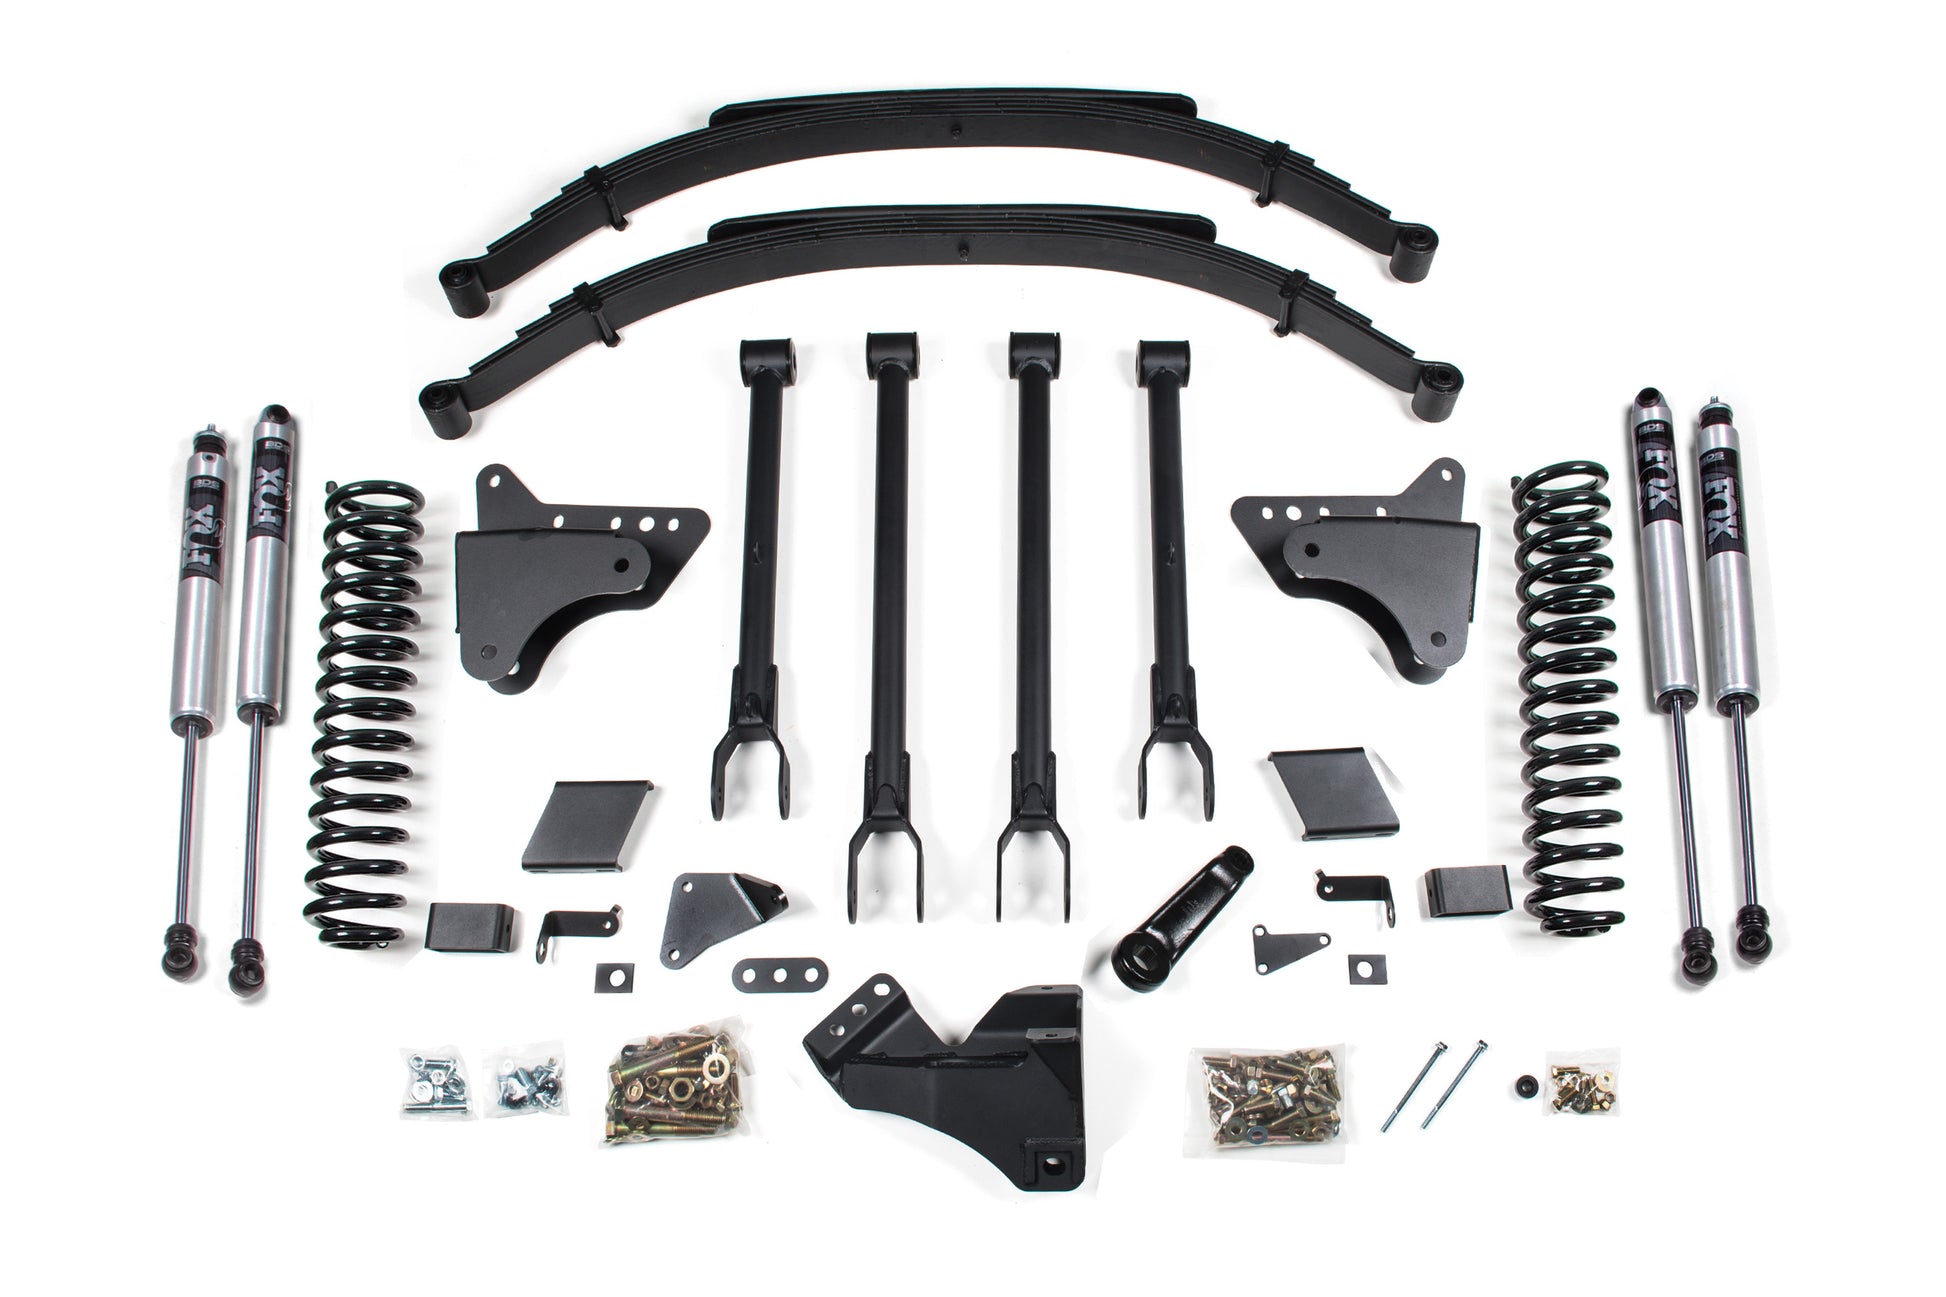 8 Inch Lift Kit - 4-Link Conversion - Ford F250/F350 Super Duty (11-16) 4WD - Diesel - Off-Road Express